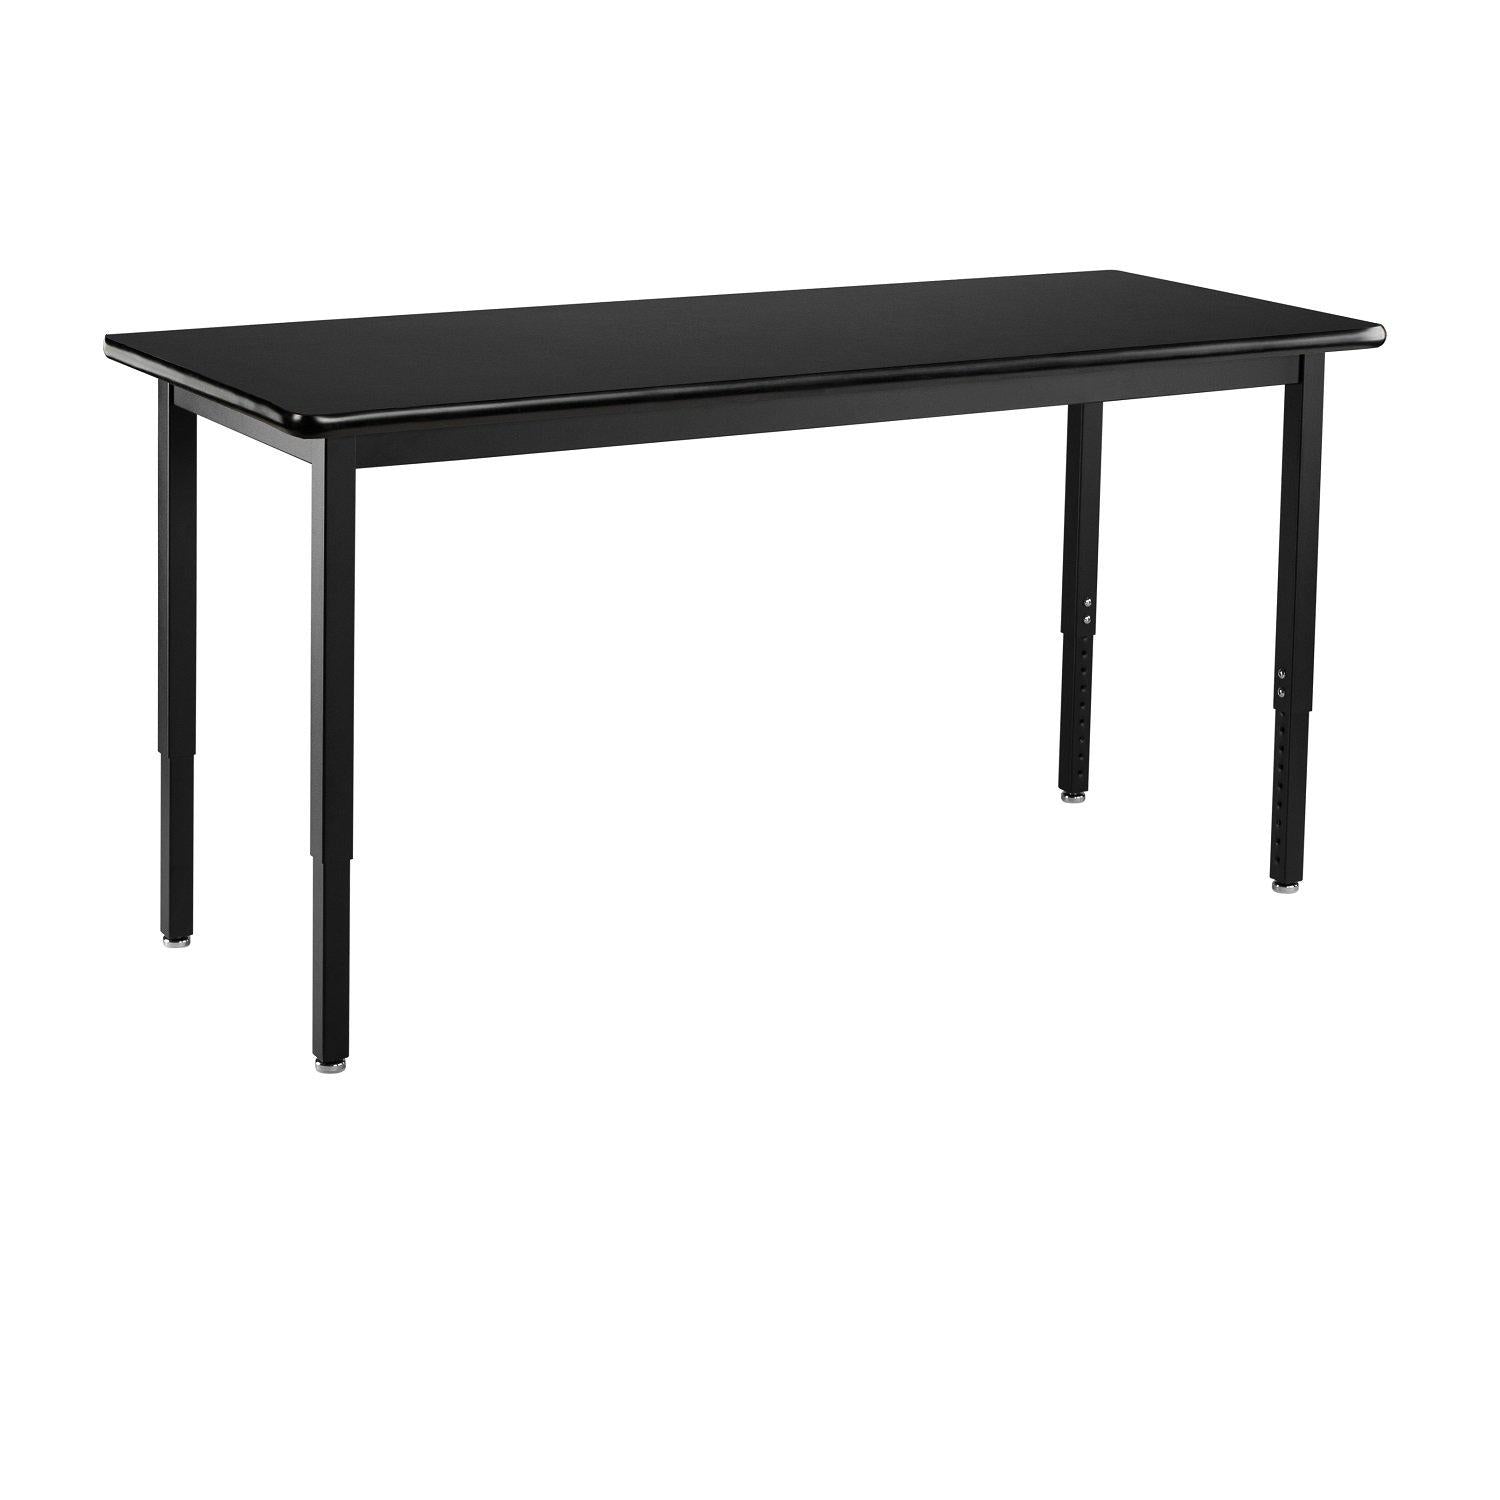 Heavy-Duty Height-Adjustable Utility Table, Black Frame, 24" x 42", High-Pressure Laminate Top with T-Mold Edge